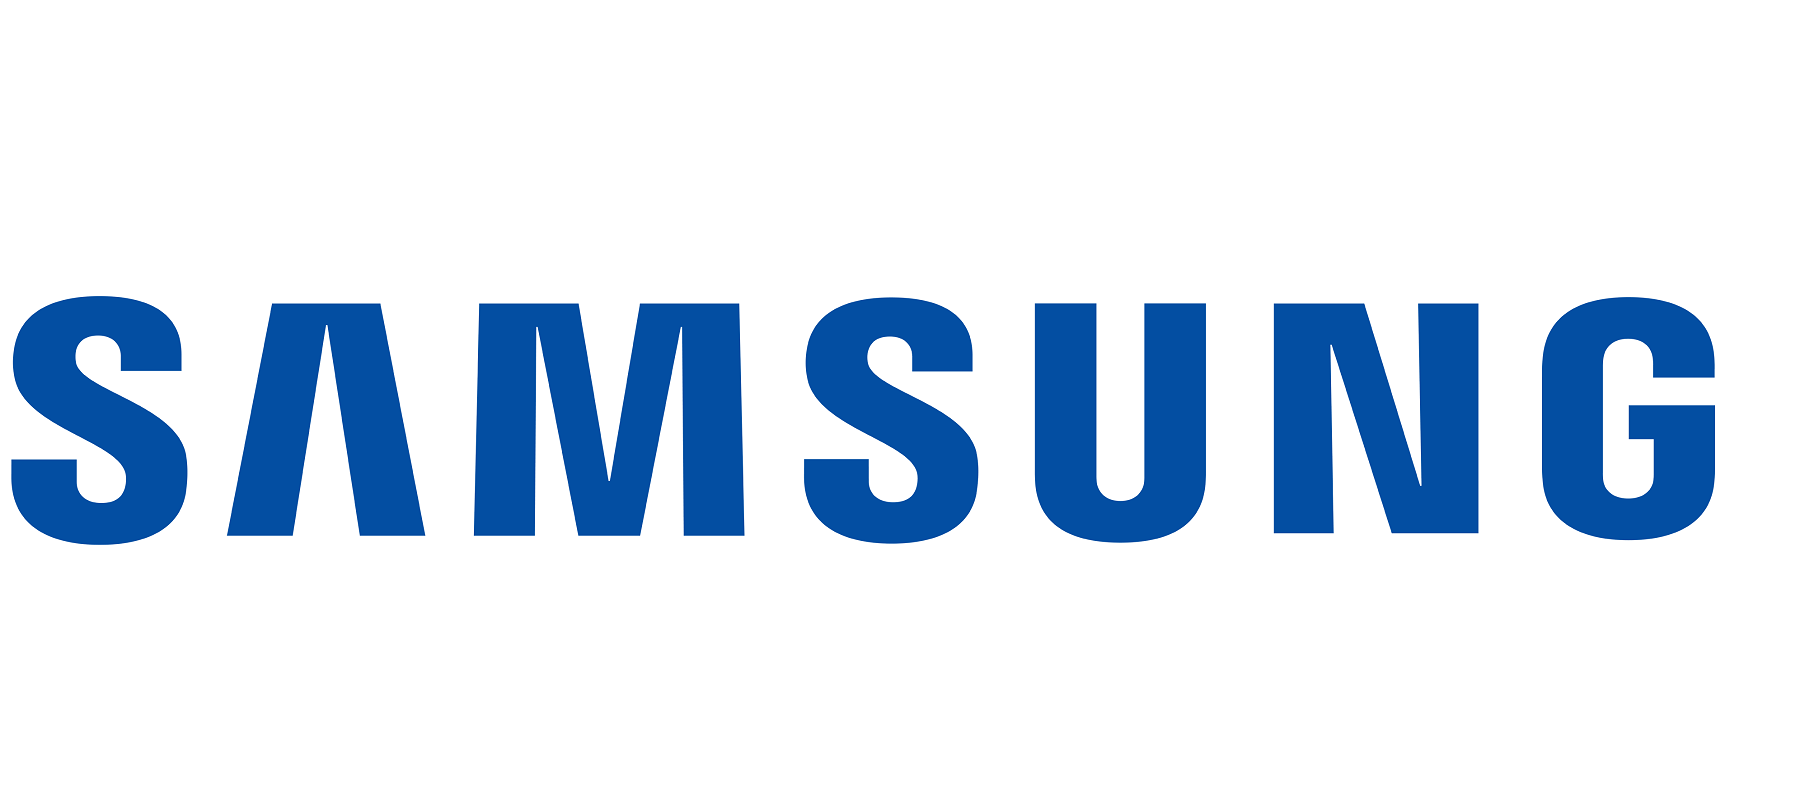 Samsung product series recognized for reduced carbon footprint